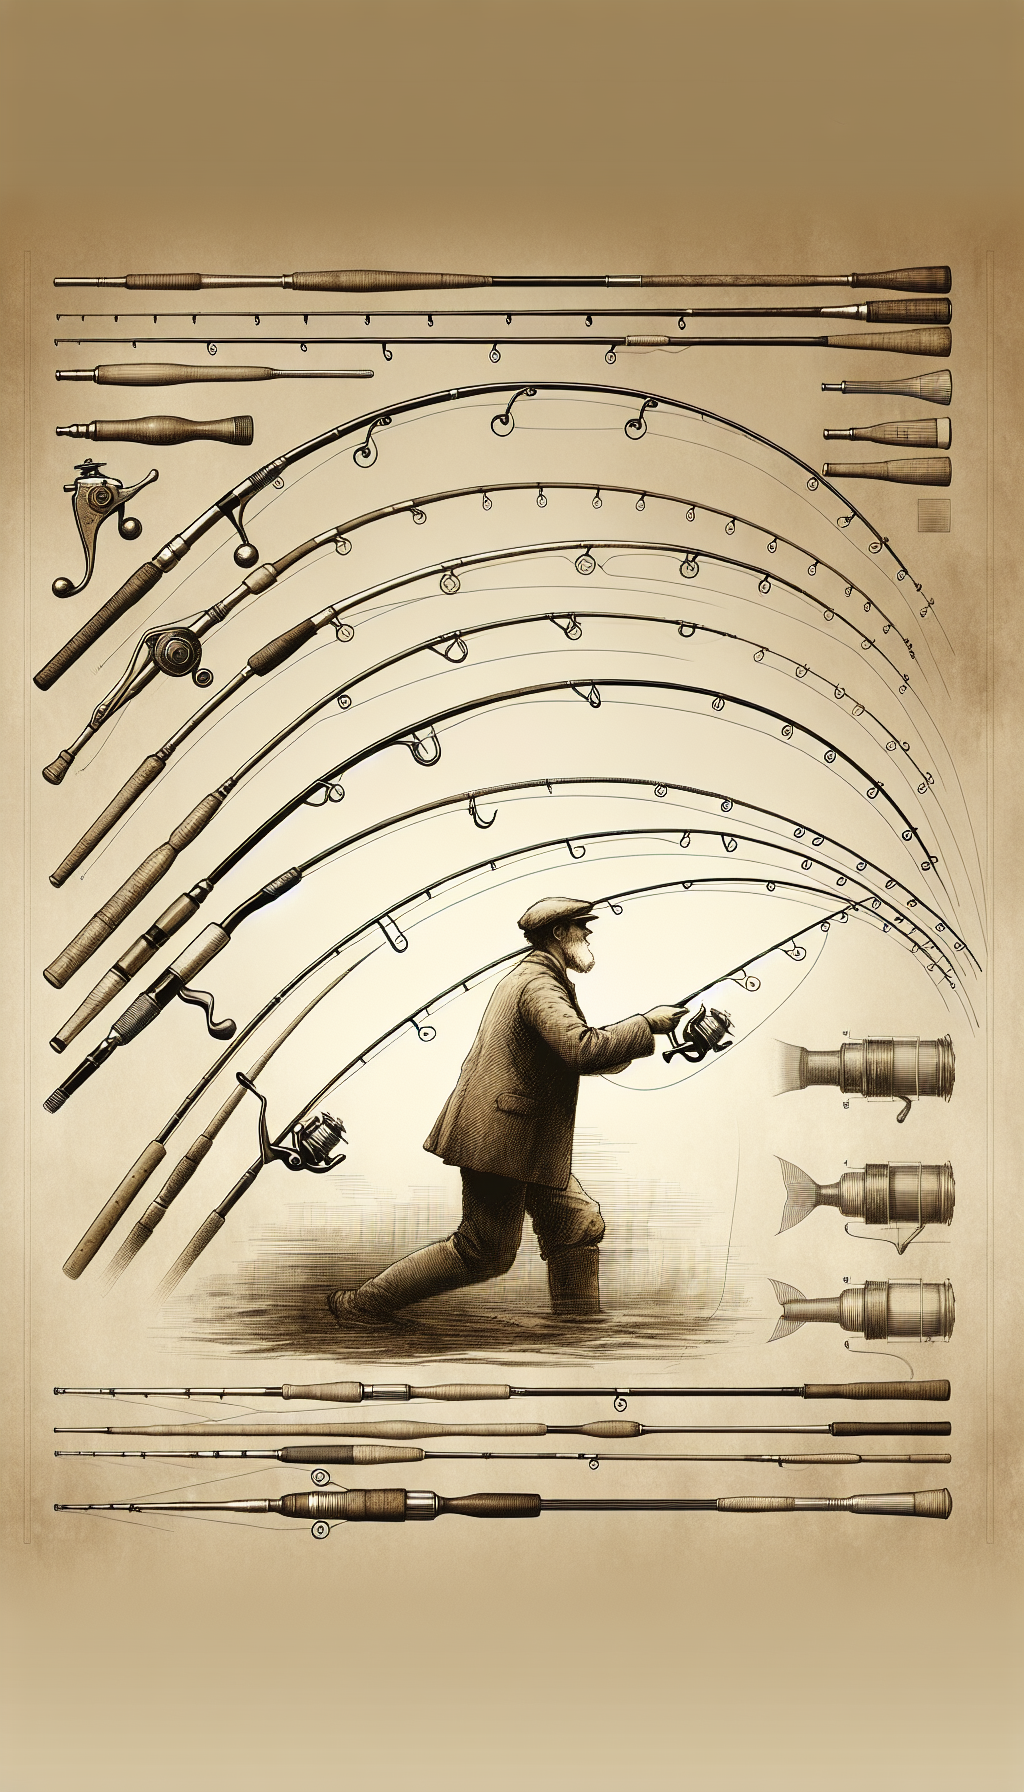 A sepia-toned illustration featuring a montage of diverse vintage fishing rods arcing gracefully from past to present, each labeled with era-specific details. In the foreground, a hand-drawn fisherman of yesteryear is caught in the act of casting his line, hook and sinker dangling mid-air, as ghosted images of patent sketches for early rod designs spiral around the central scene.